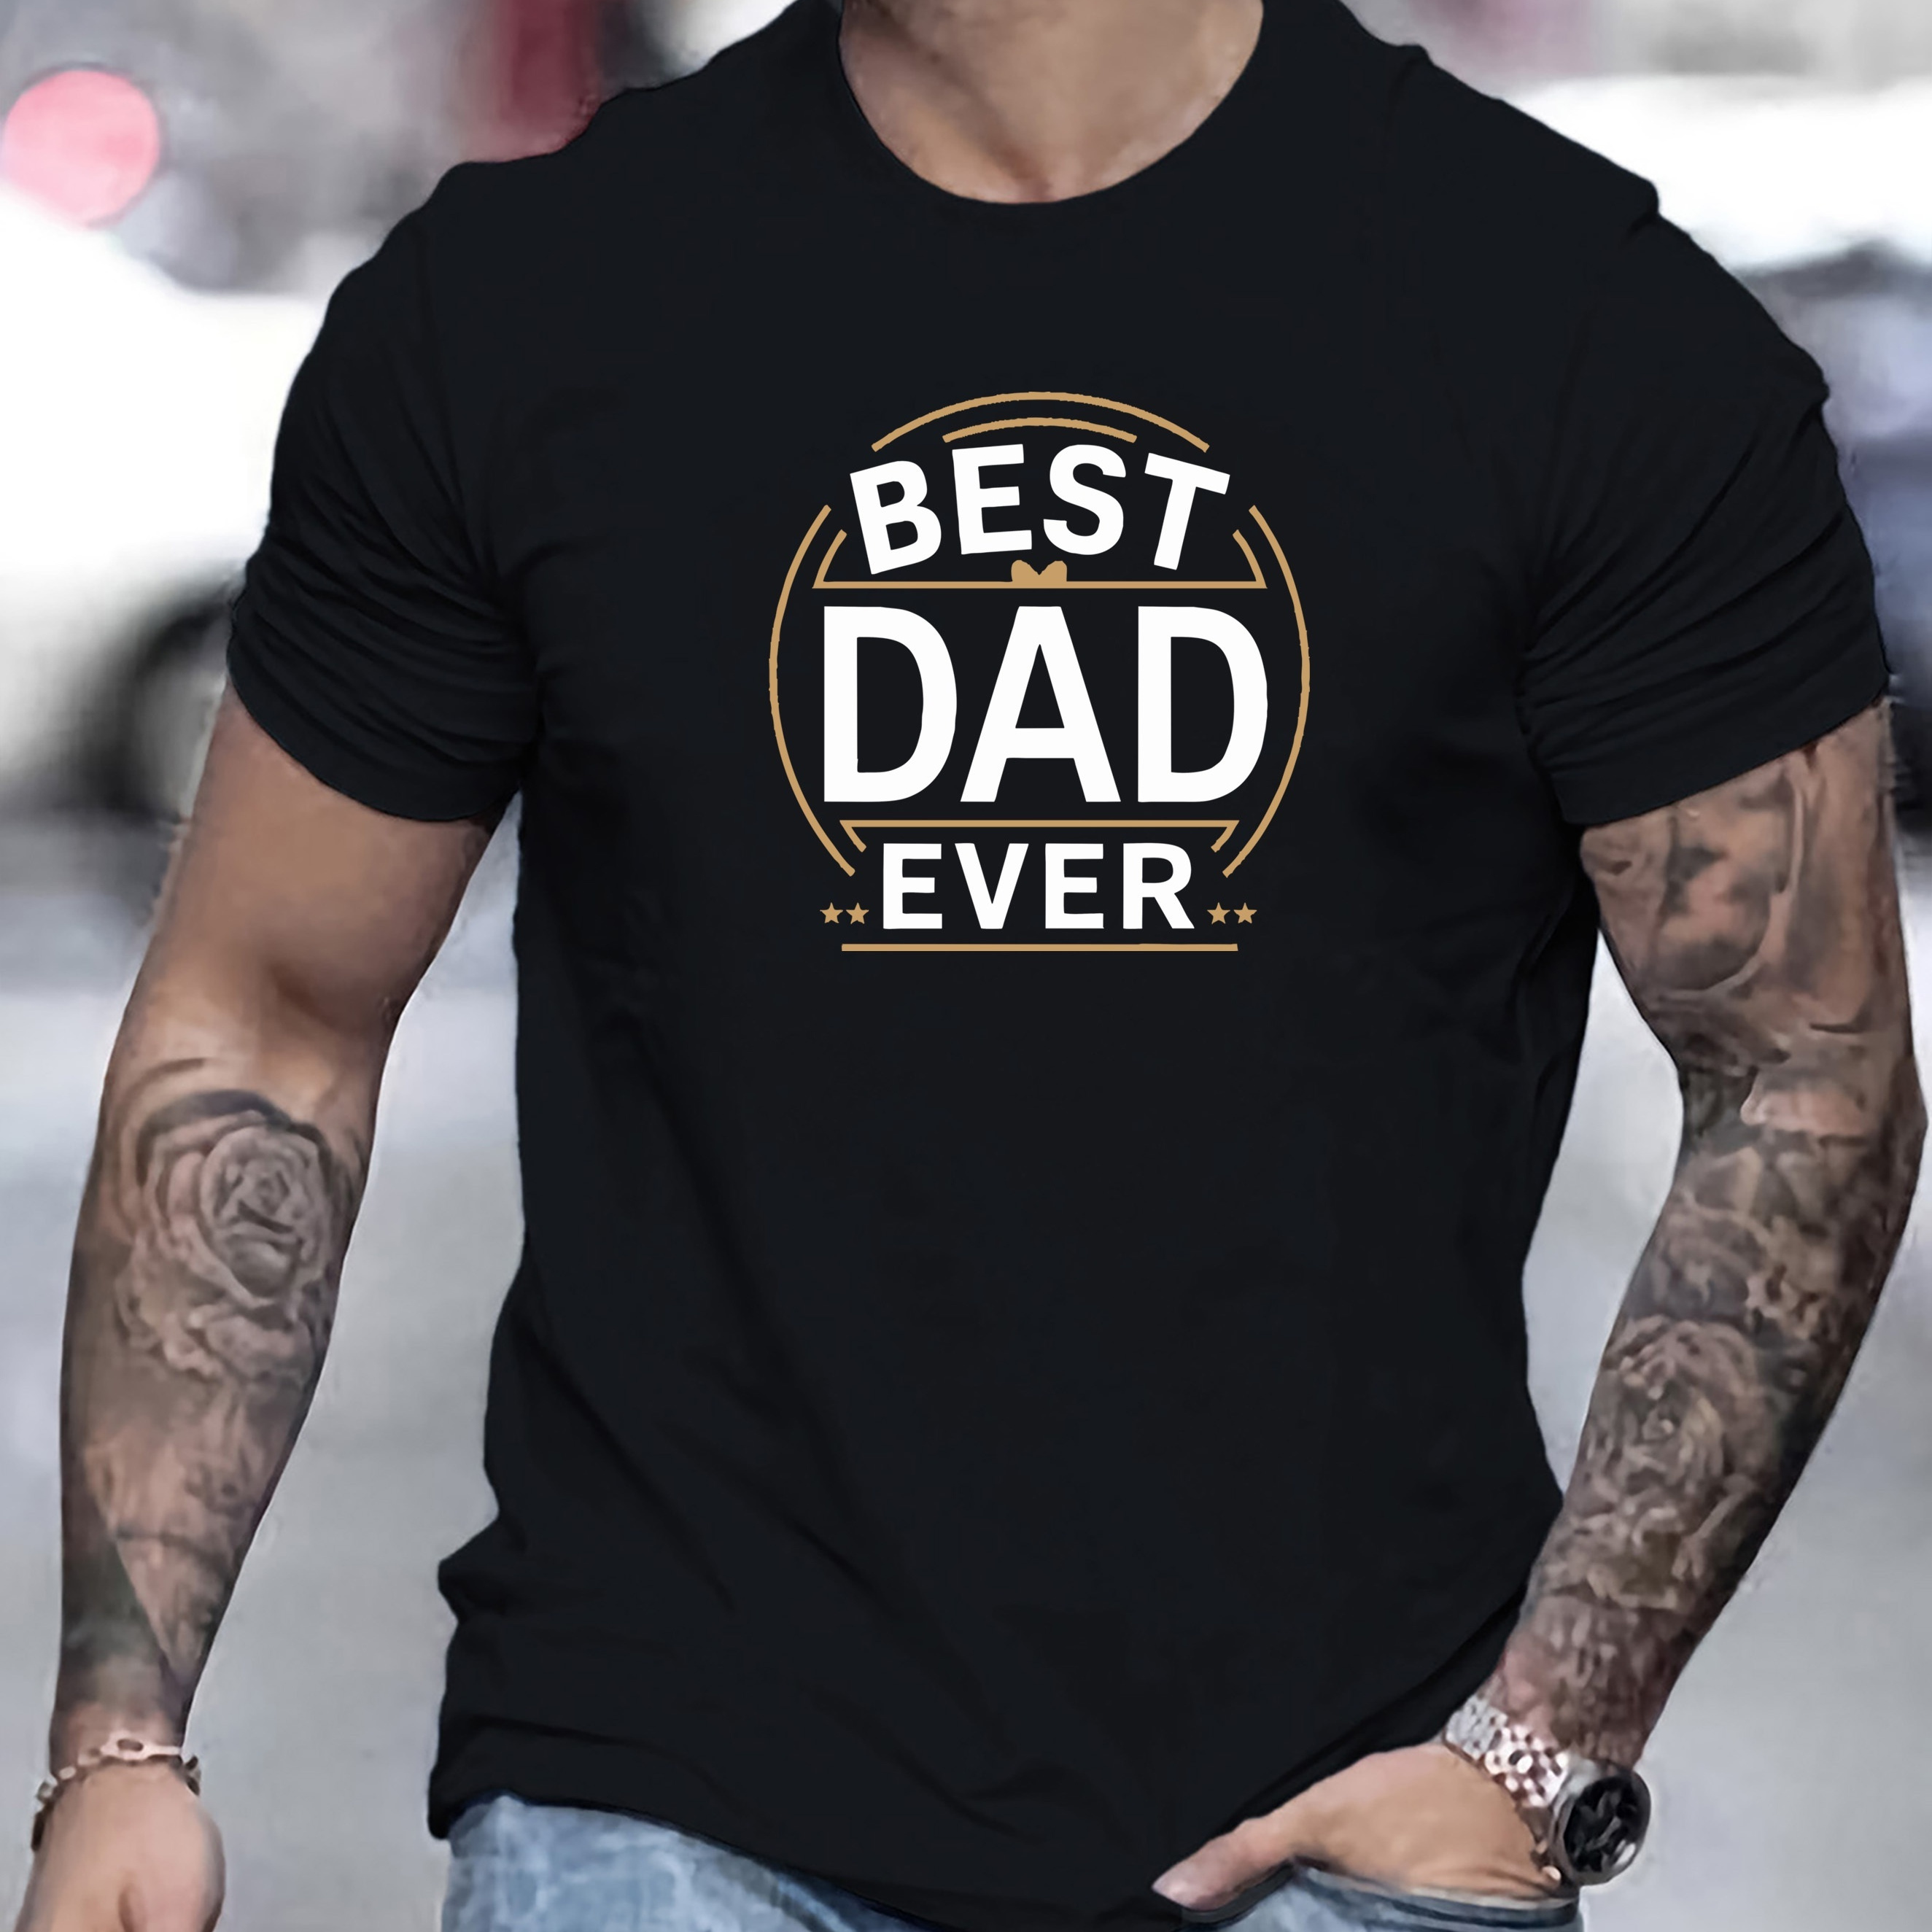 

Best Dad Ever Graphic Men's Short Sleeve T-shirt, Comfy Stretchy Trendy Tees For Summer, Casual Daily Style Fashion Clothing